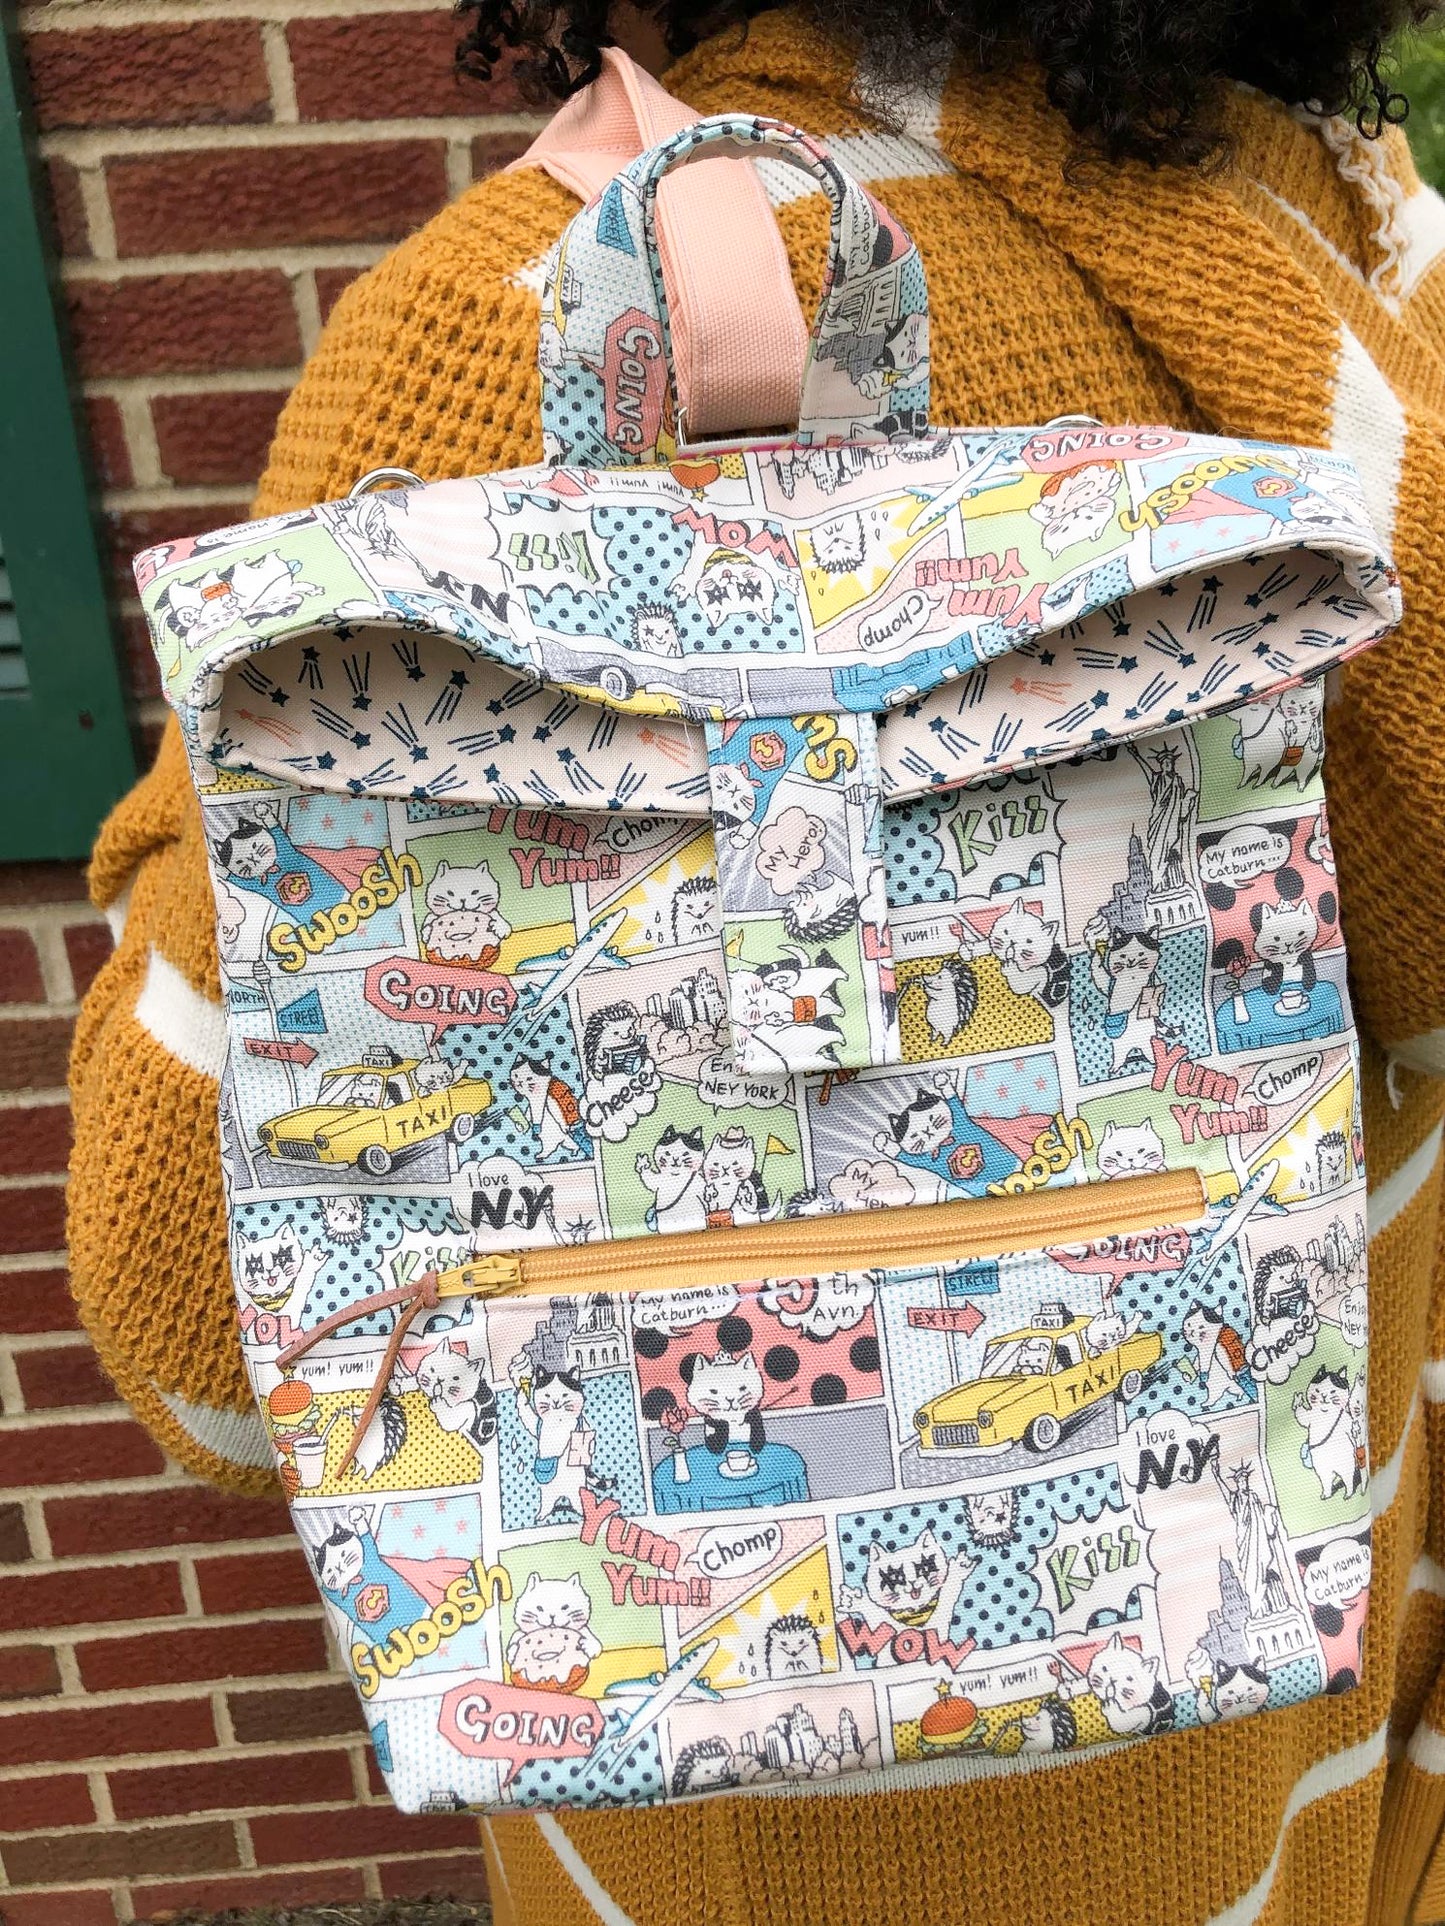 Abbey Convertible Backpack Digital Sewing Pattern – Love You Sew